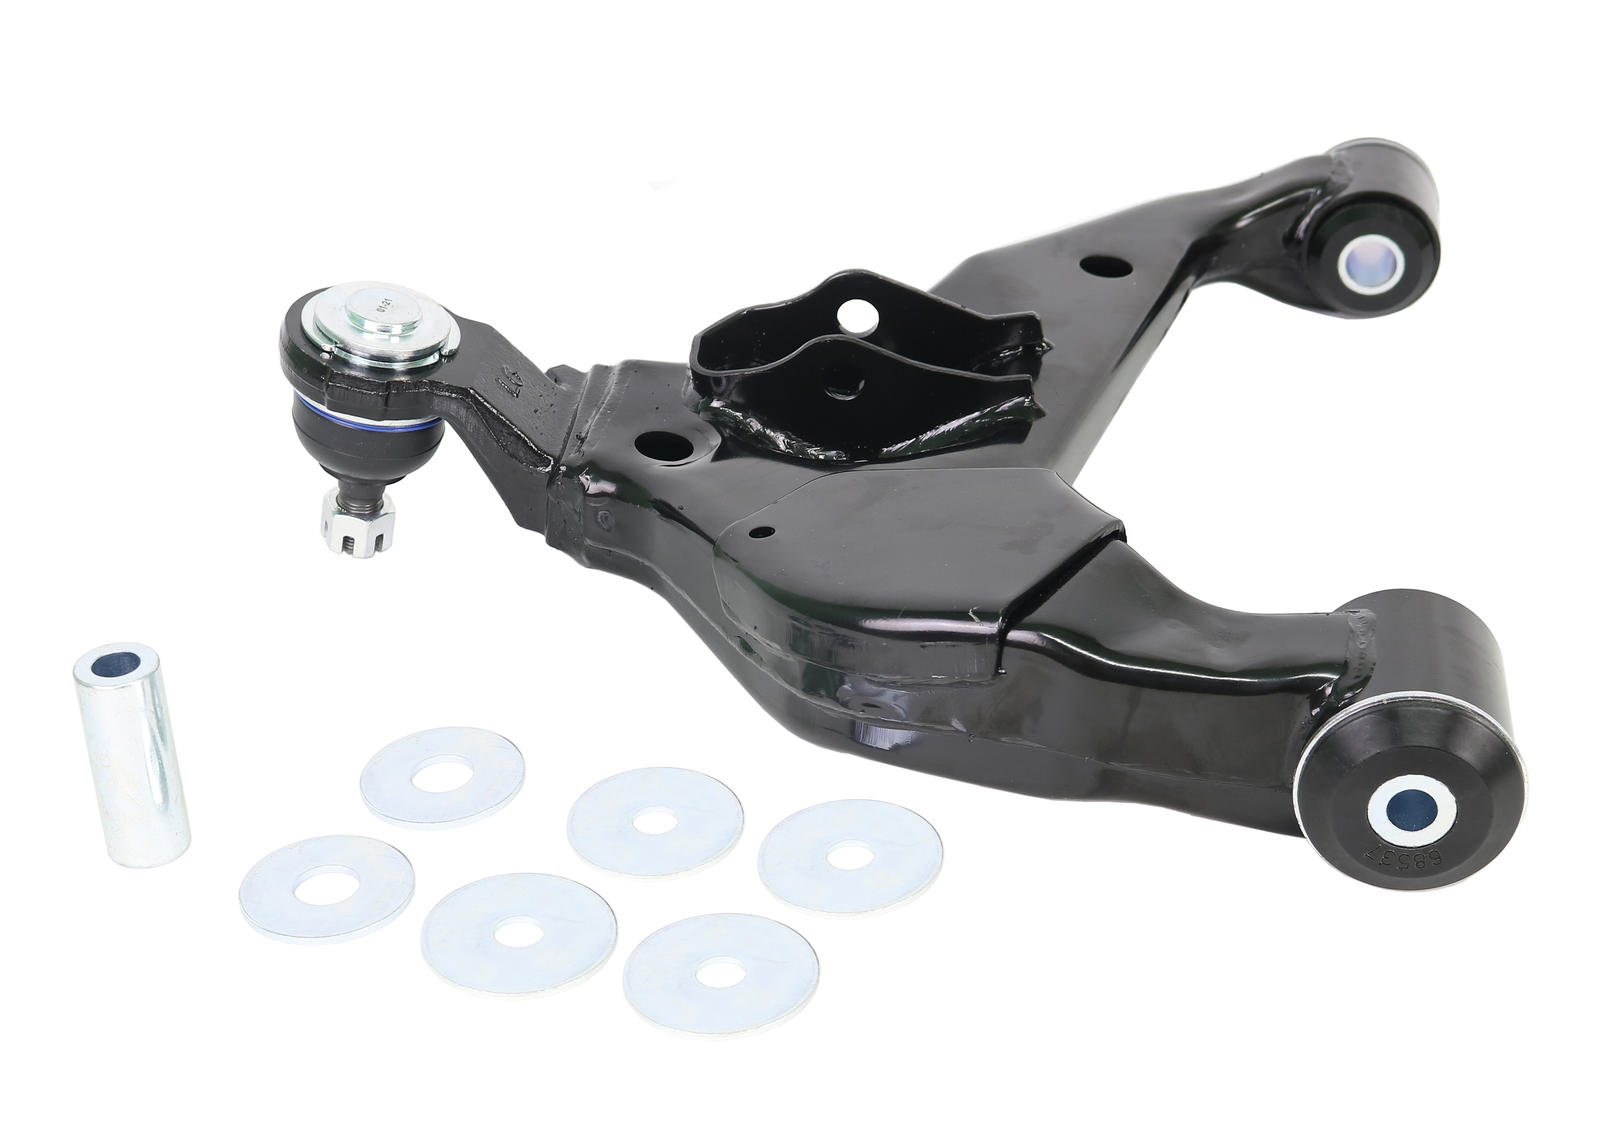 Front Control Arm Lower - Arm to Suit Toyota HiLux 2005-2015 and Foton Tunland P201 4wd